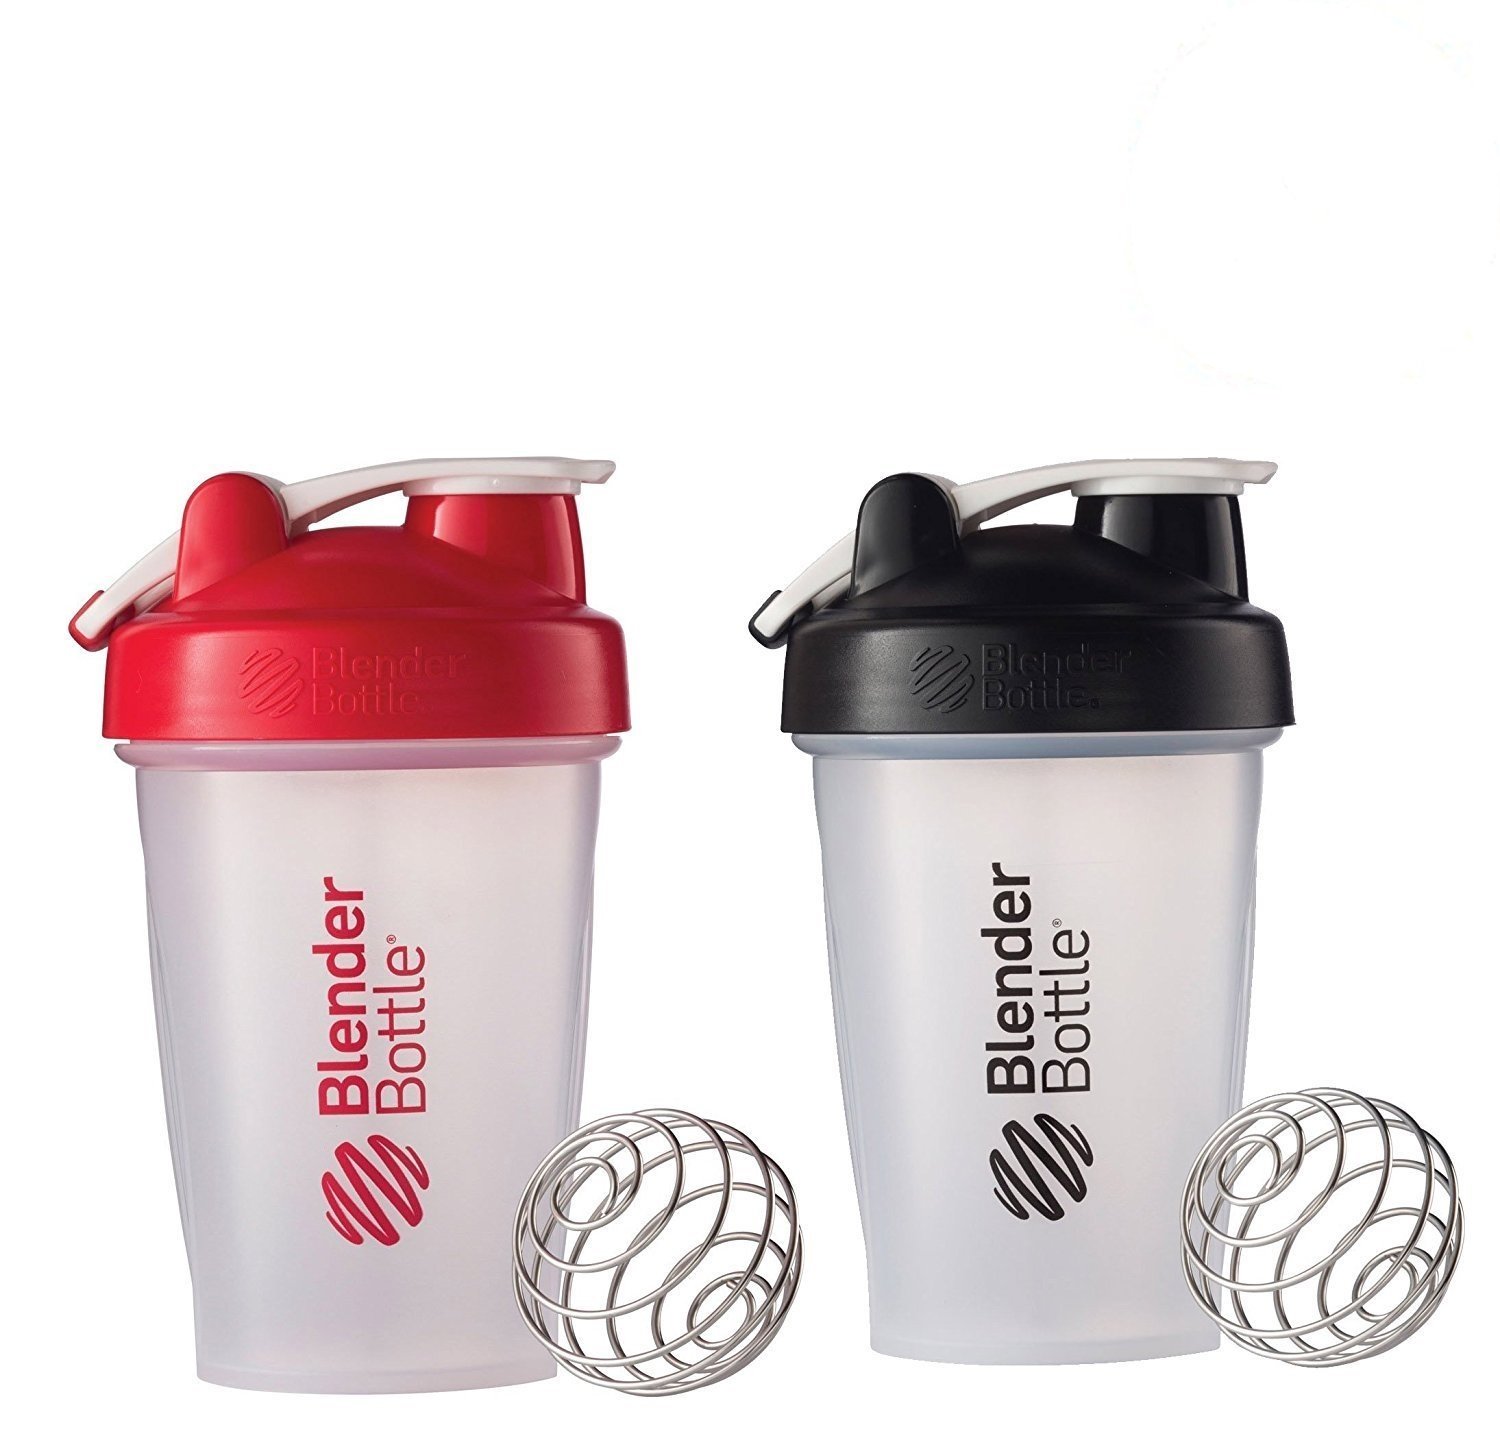 BlenderBottle 2 Pack with Stainless Steel Wire Whisk Ball - Two 20oz Bottles for Protein Shakes and Supplements